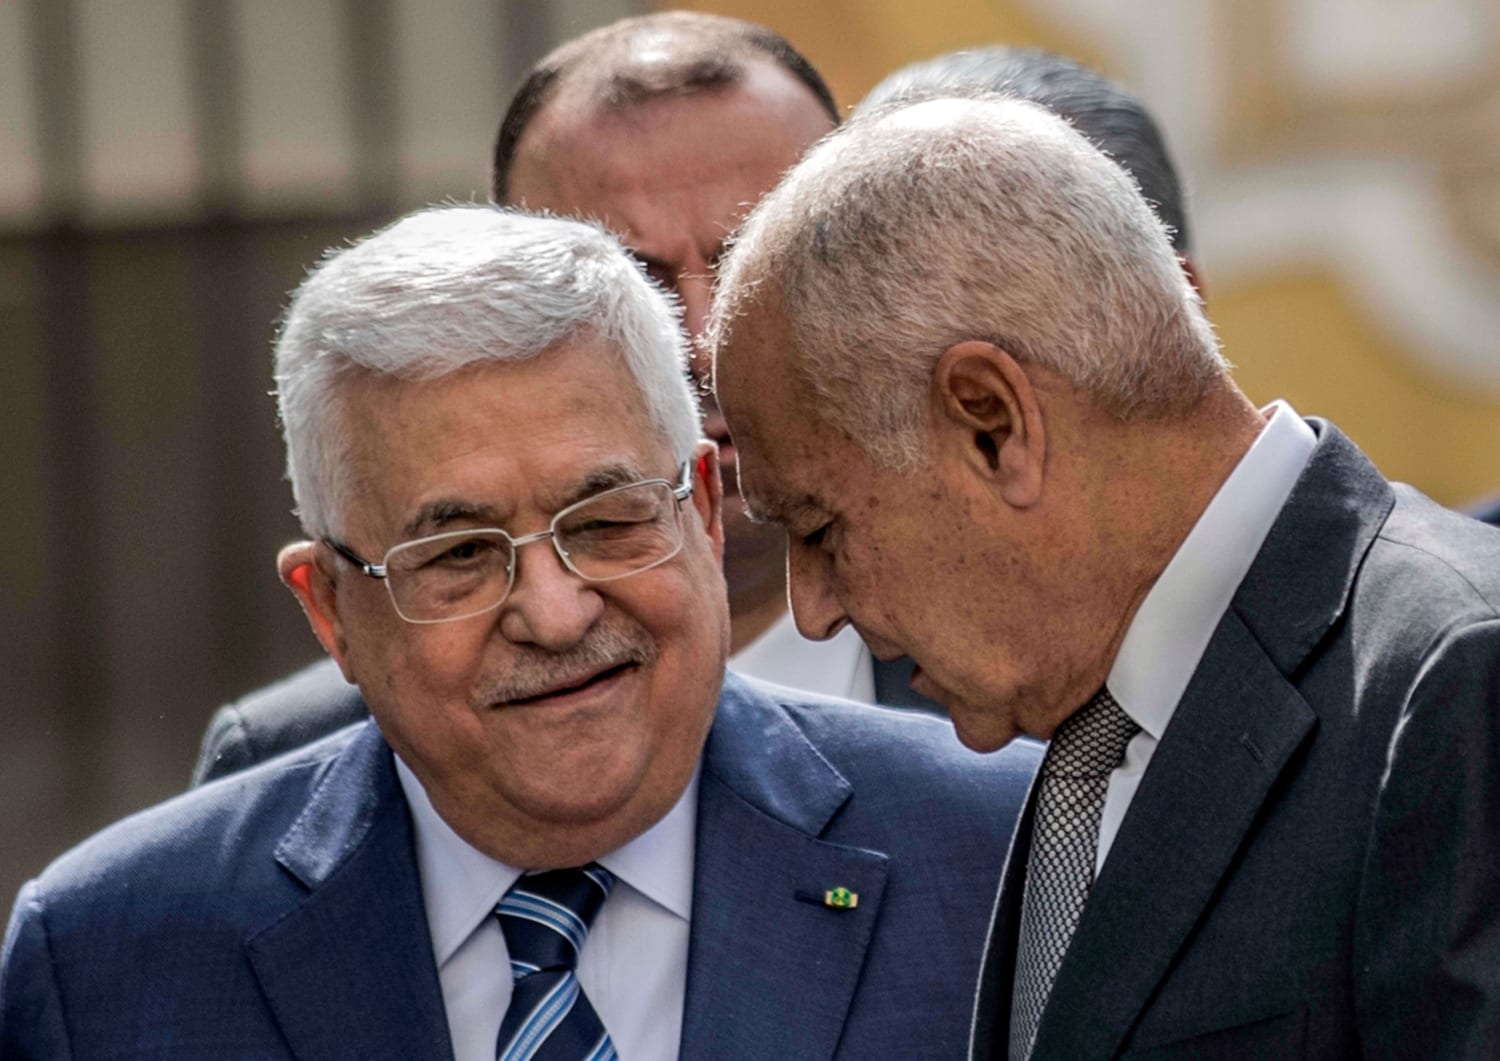 Palestinian President Mahmoud Abbas threatens to cut security ties over  . Mideast plan